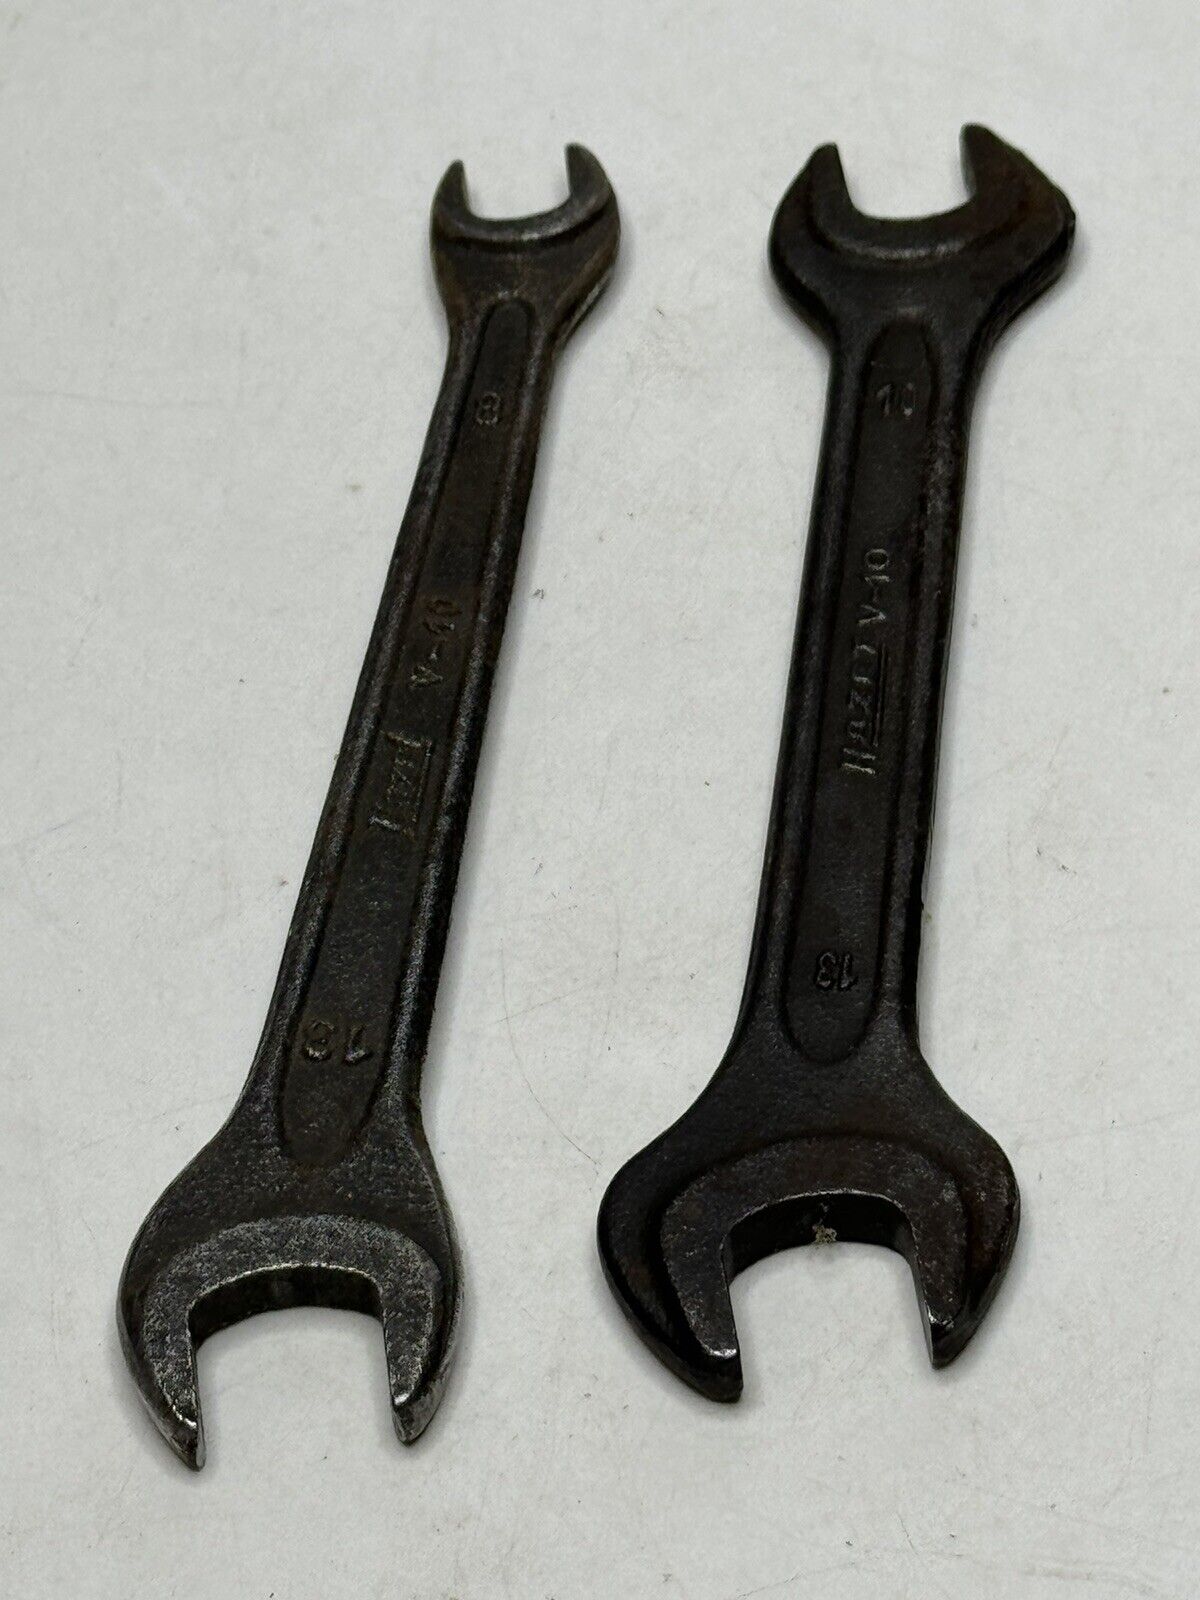 Hazet V 10 Wrenches 10 & 13 mm & 8mm Vintage Lot Of 2 Open Combination Wrench